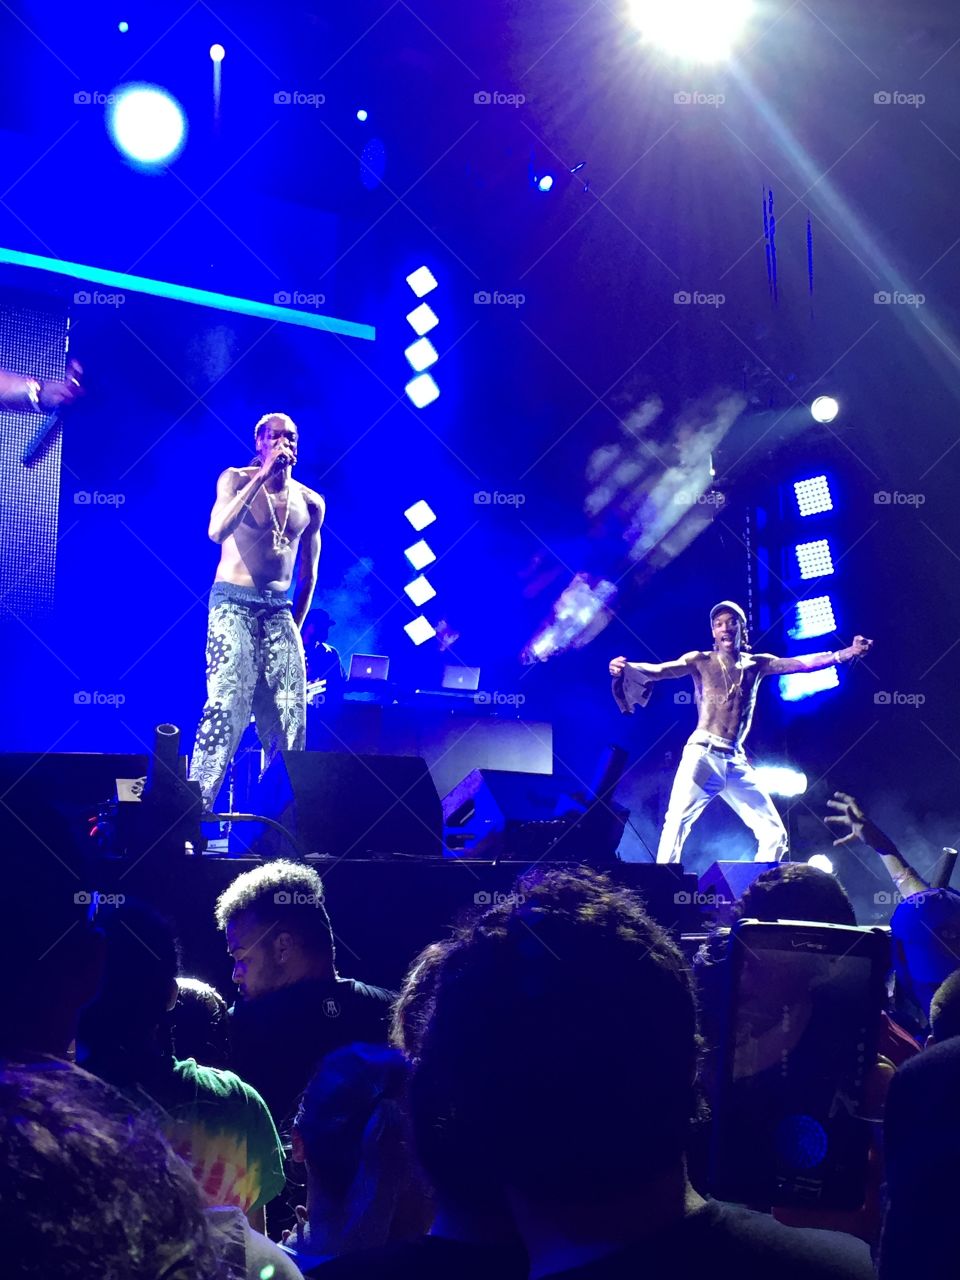 Snoop Dogg and Wiz Khalifa doing they're thing on stage in Tampa Florida high road tour 